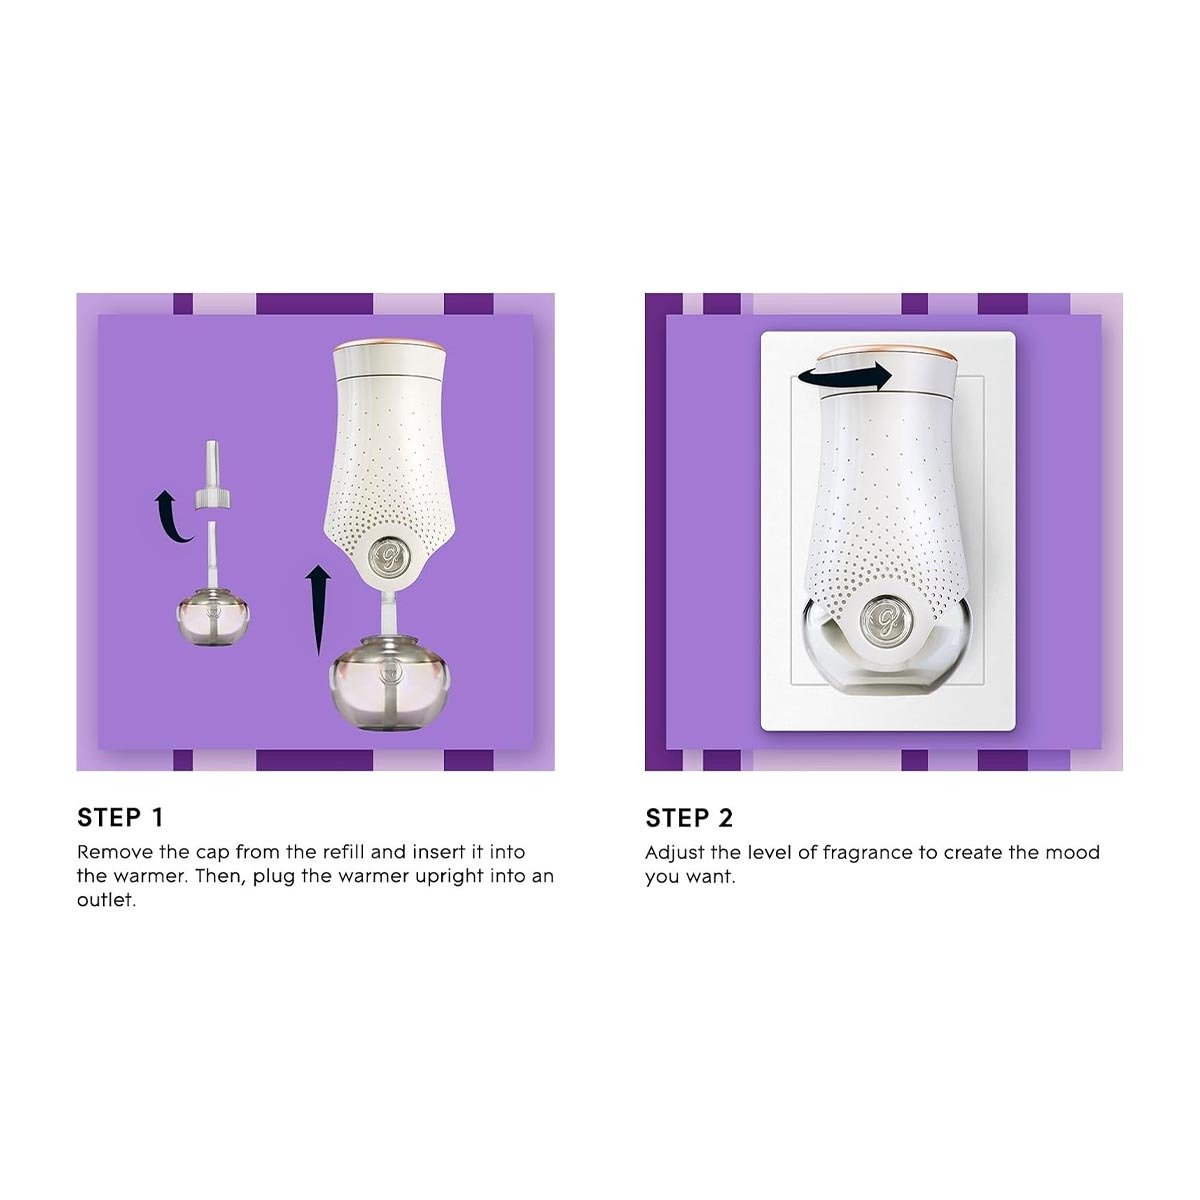 Glade Electric Warmer + Lavender Scented Oil Value Pack 20 ml